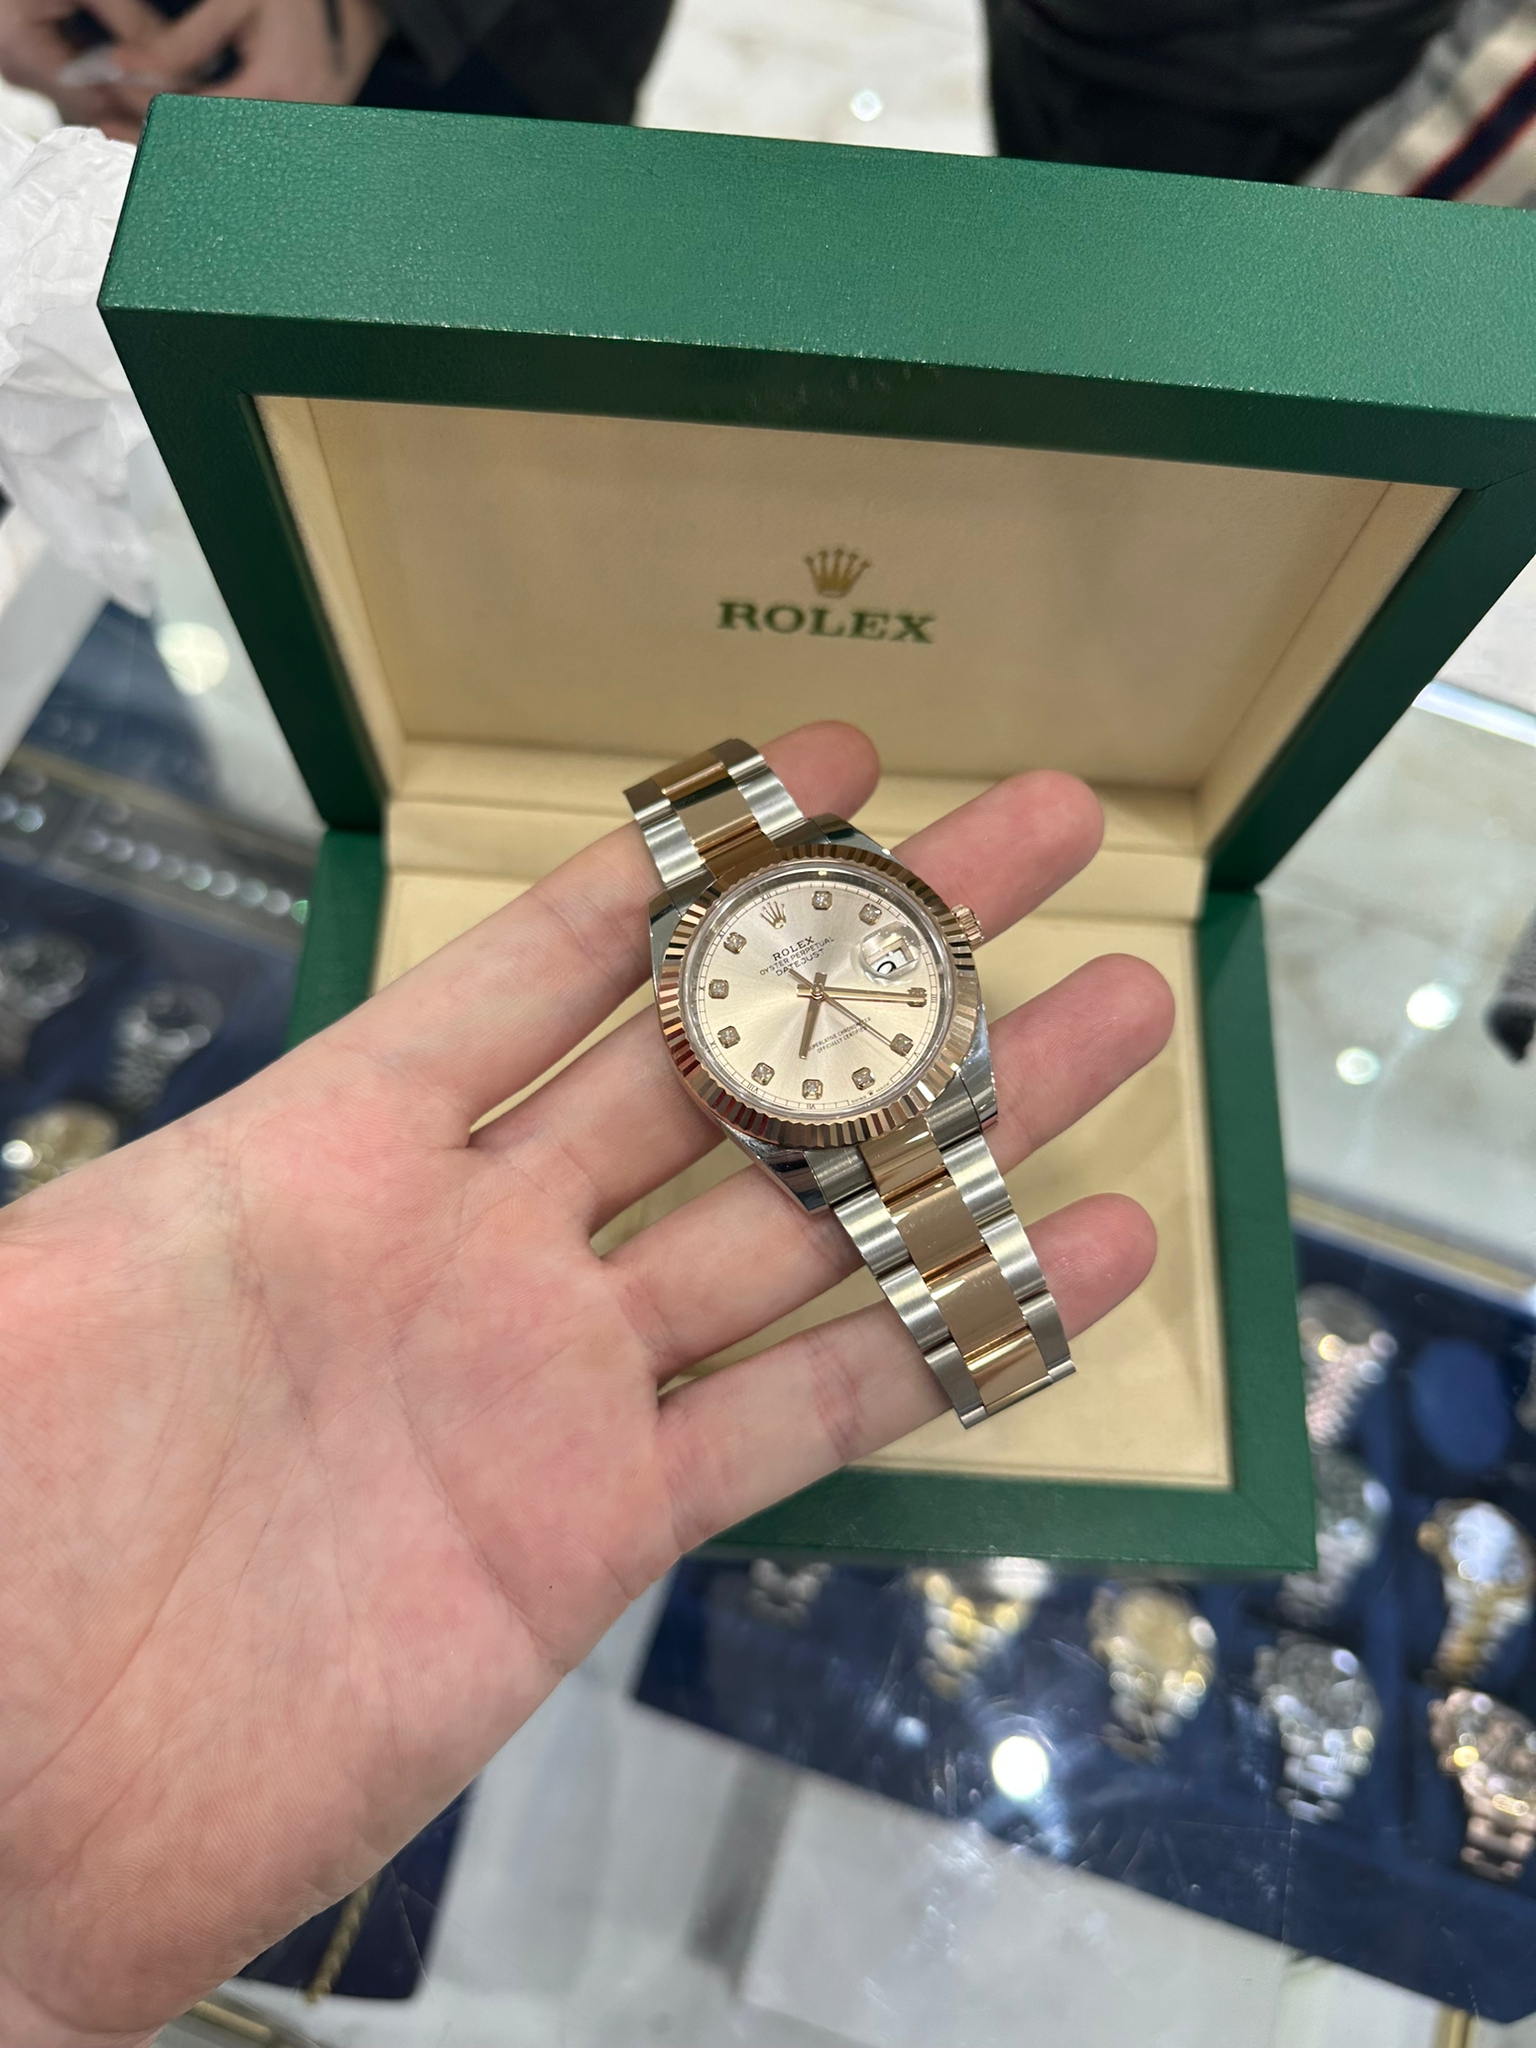 Rolex Datejust 41mm steel and rose gold with Sundu - Image 11 of 11